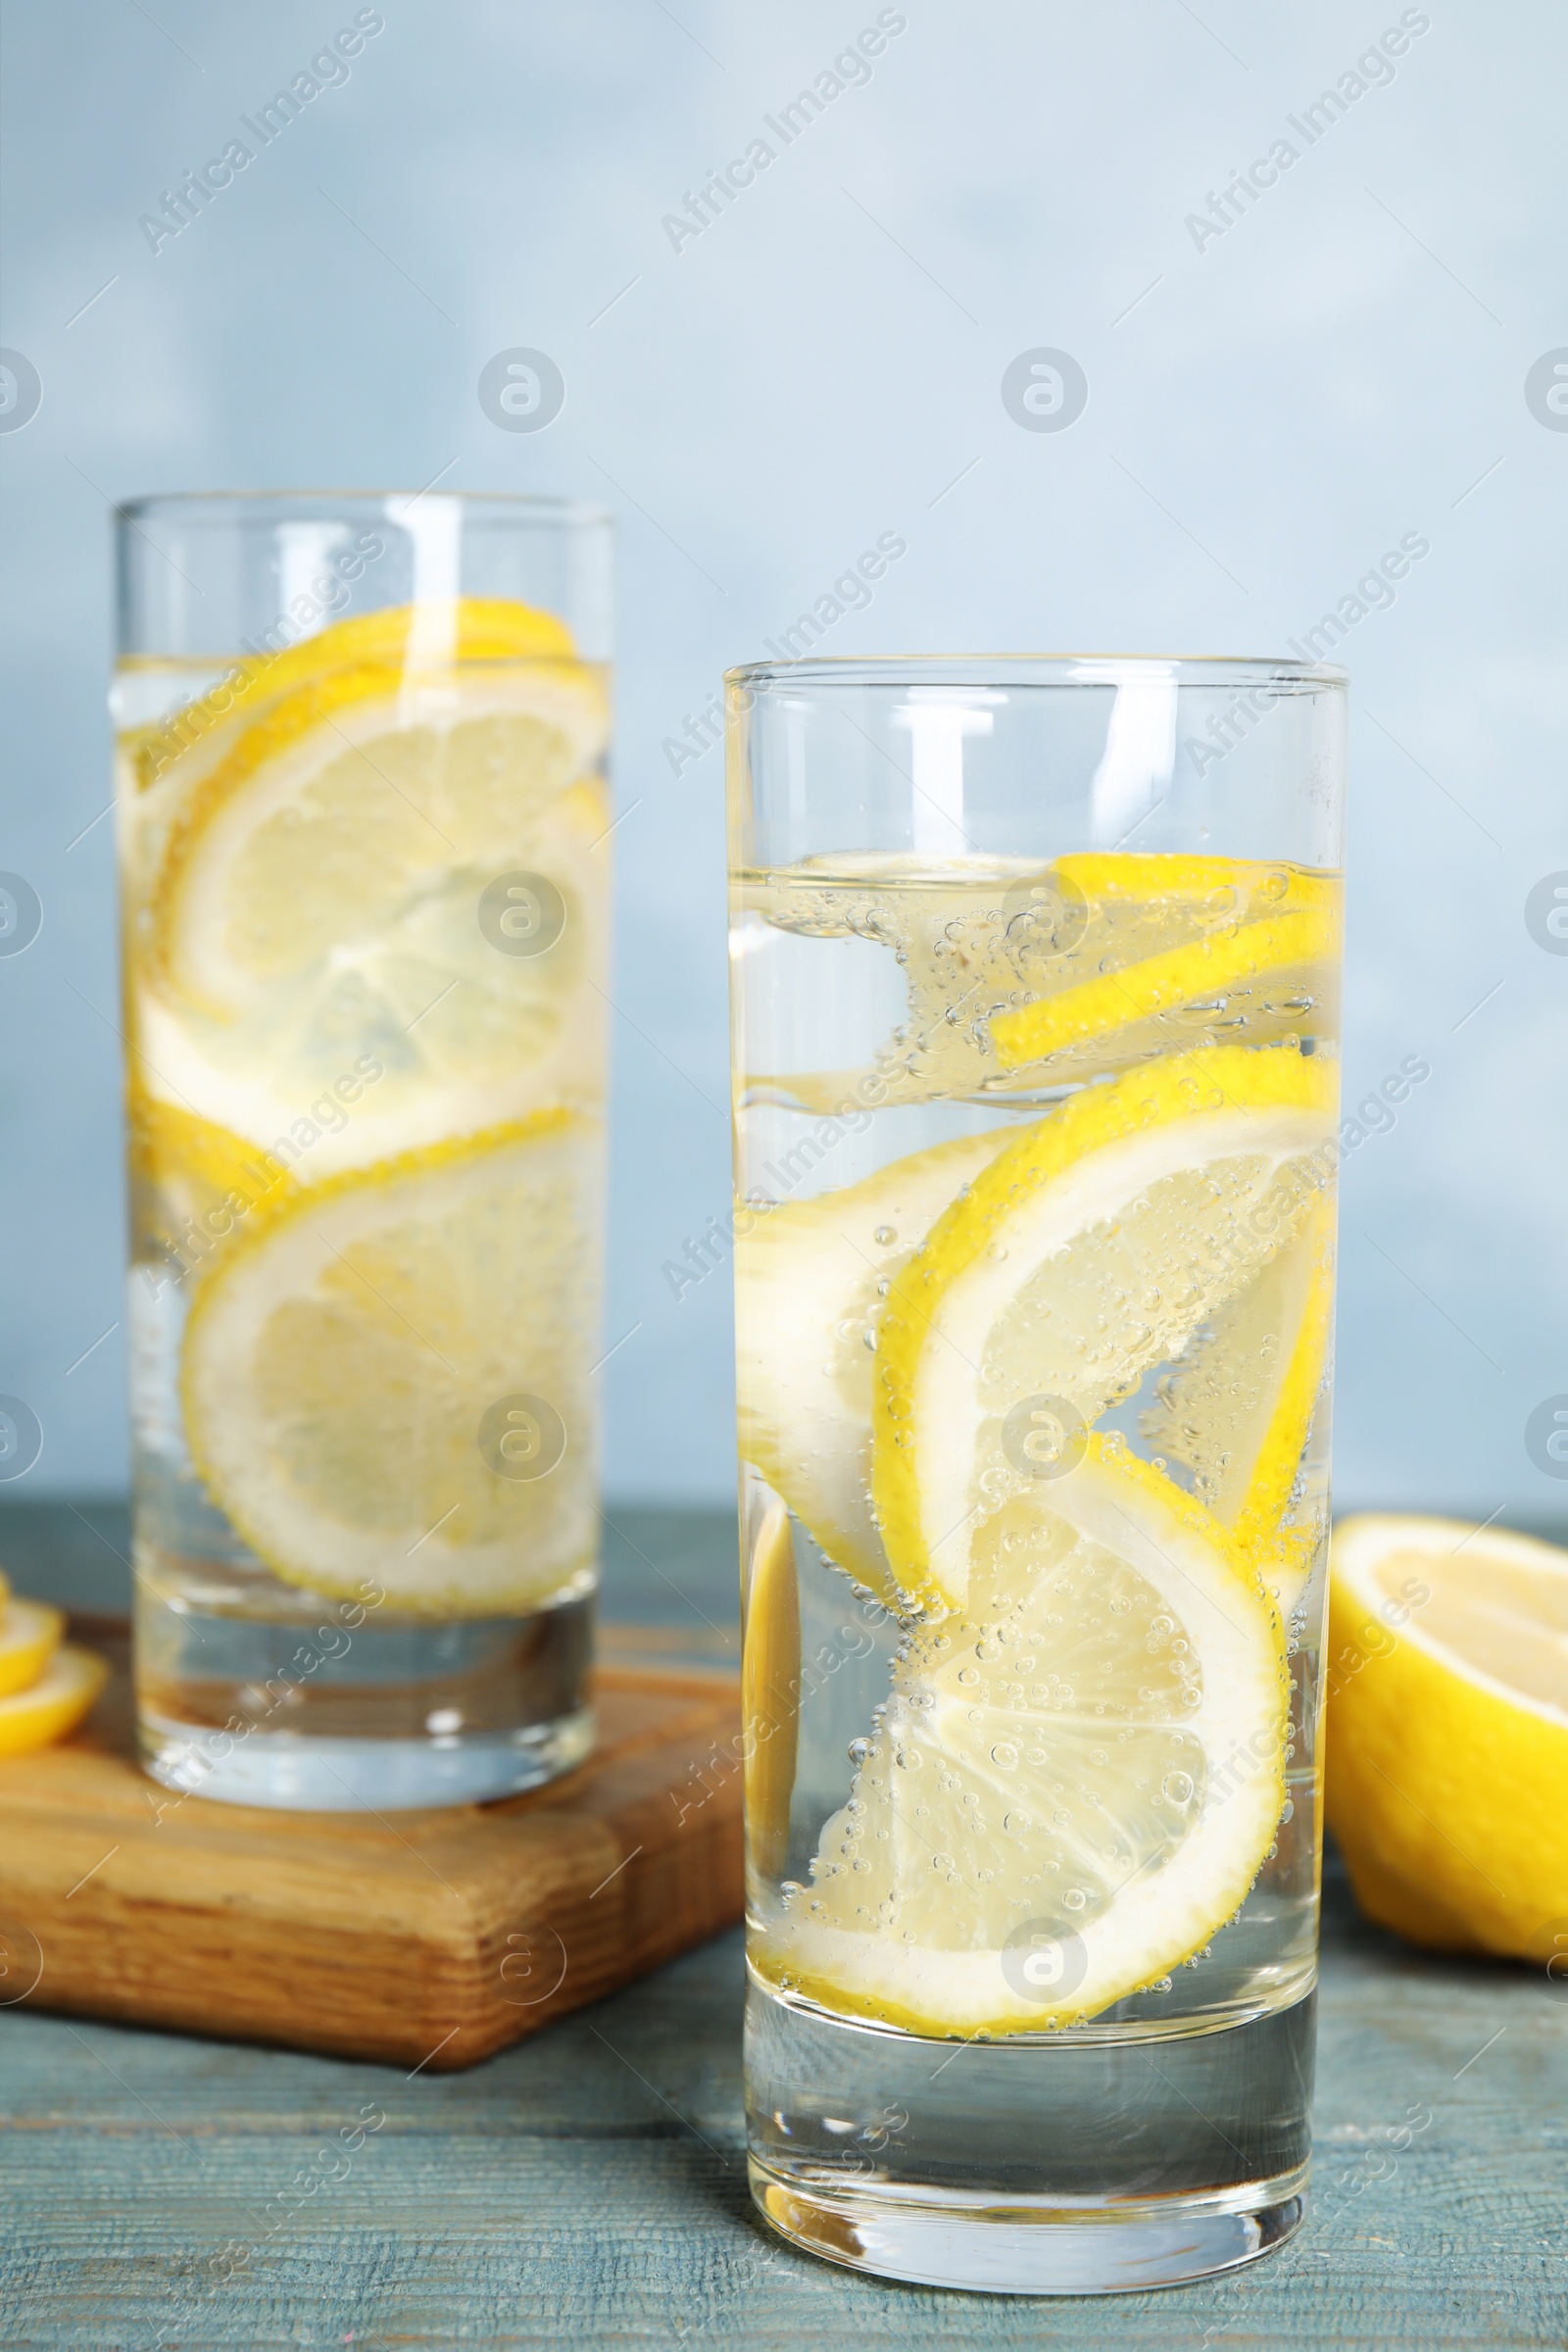 Photo of Soda water with lemon slices on blue wooden table